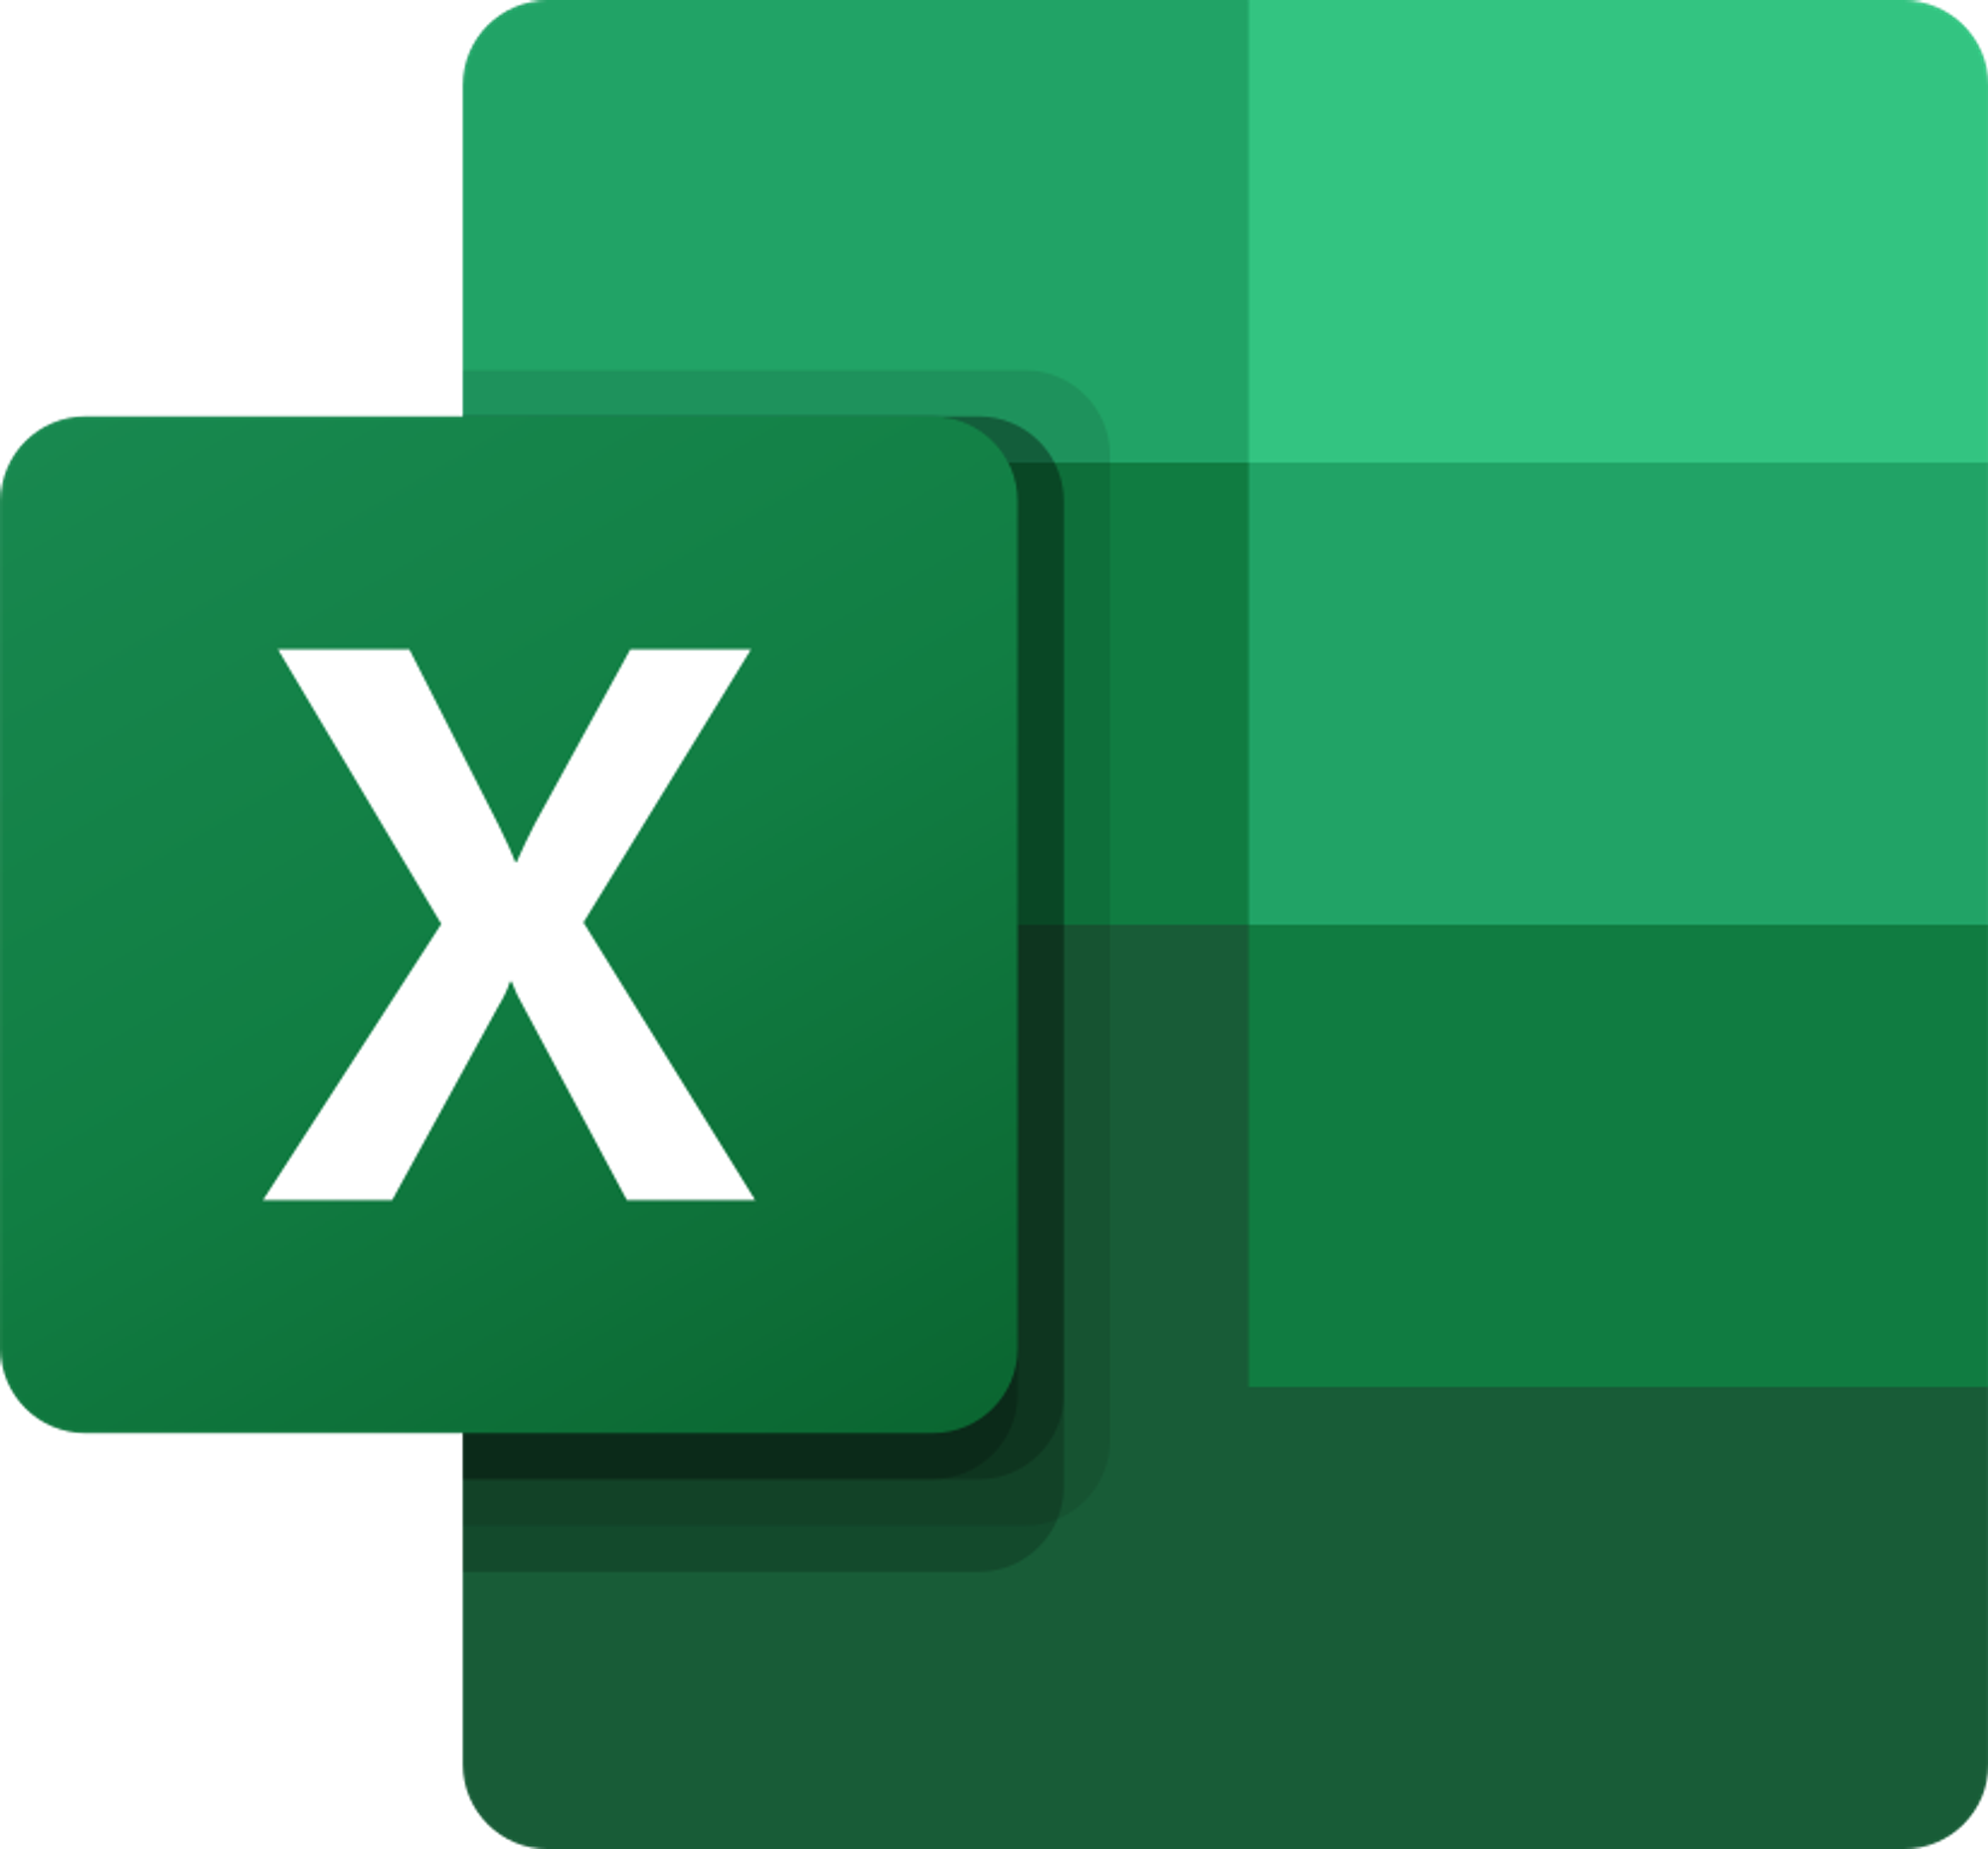 Viewing secure Excel workbooks with Confidencial